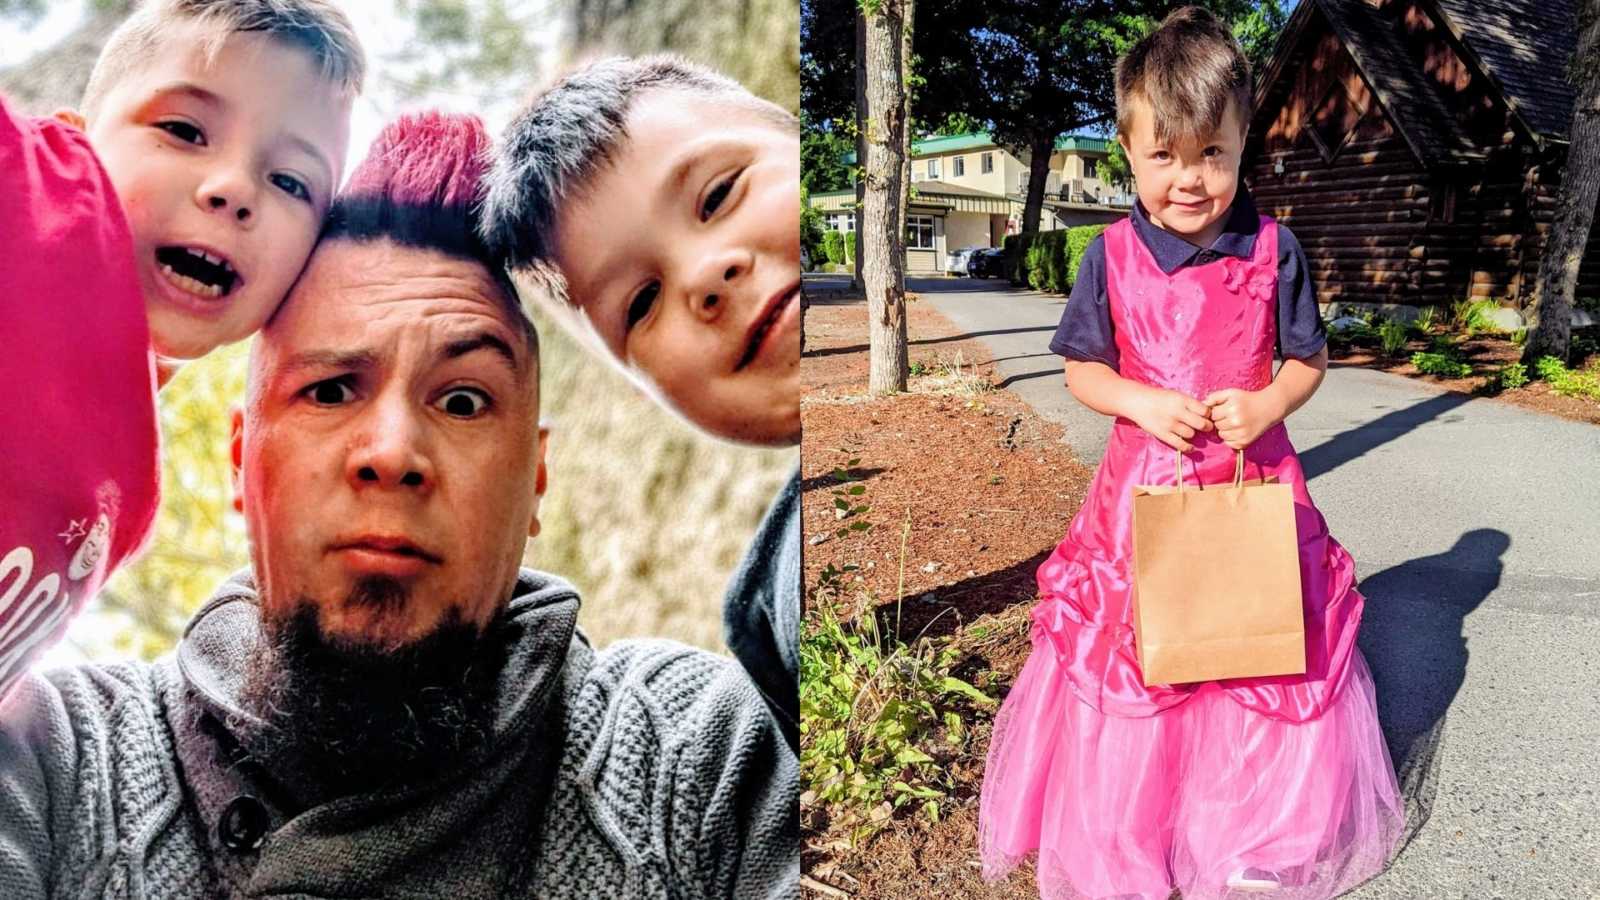 On the left, dad takes a silly selfie with his sons, on the right, one of his sons shyly wears a pink dress